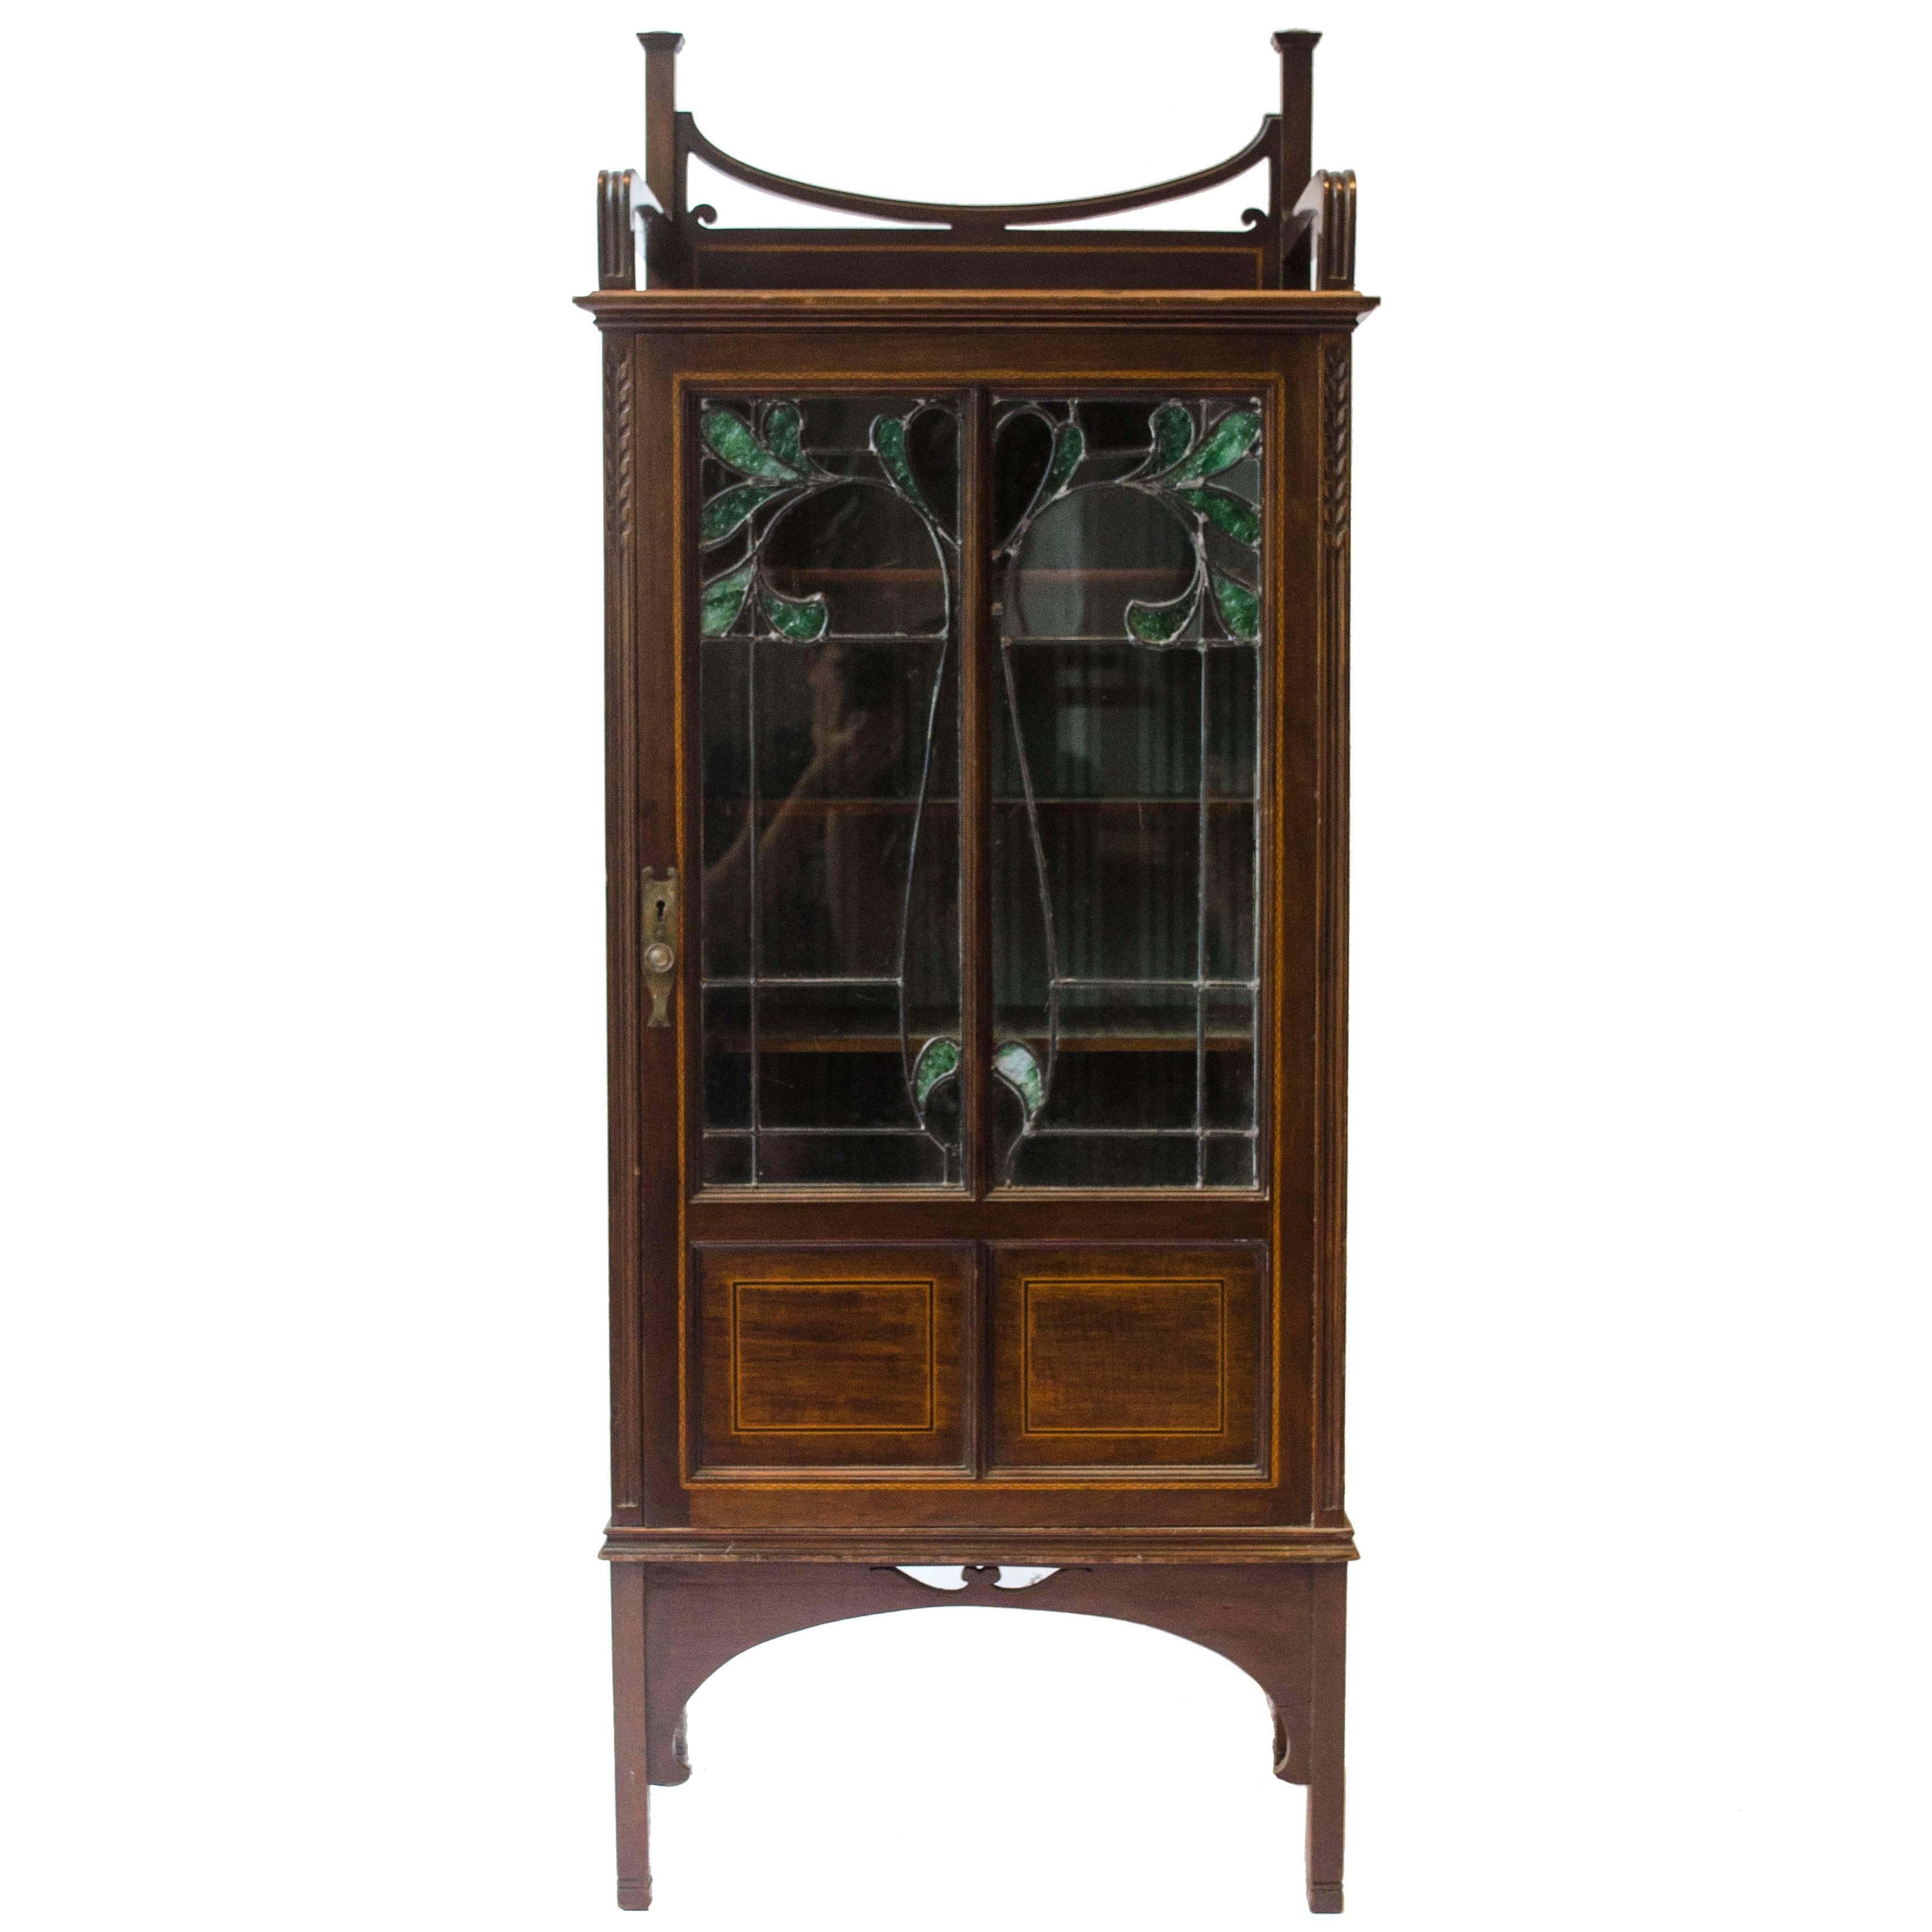 A Petite Arts & Crafts Mahogany Display Cabinet in the Anglo-Japanese Style. For Sale